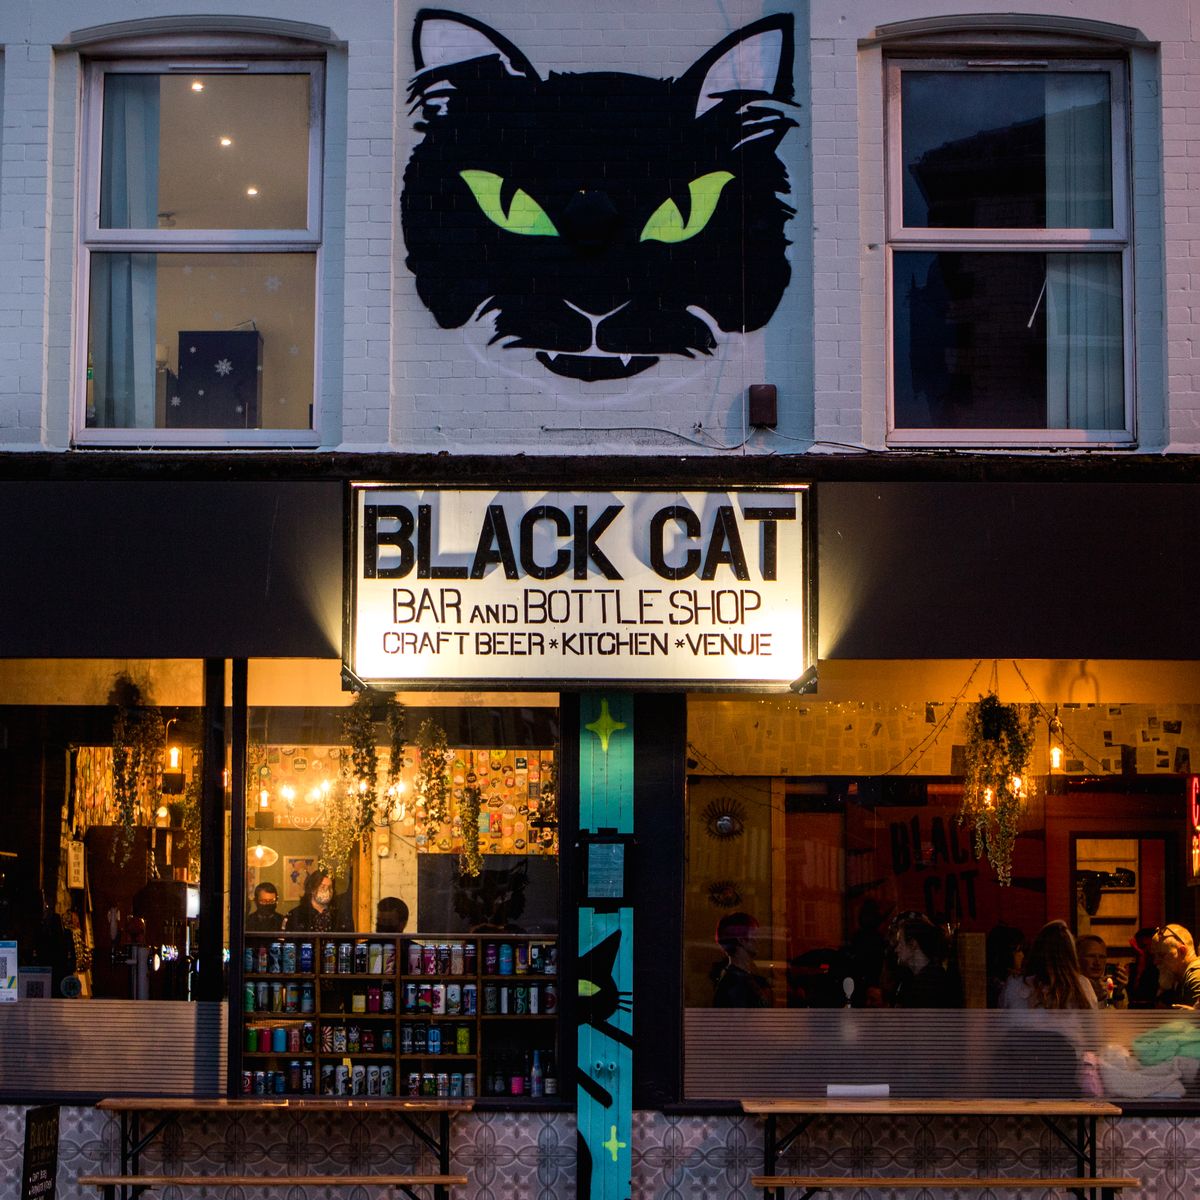 VENUE HIGHLIGHT: @blackcatliv If you want your festival full of non-stop live music, DJ sets and great beer then this is the venue for you. Black Cat have 3 days packed with incredible acts like Boston Shakers, Salt the Snail, Gen and the Degenerates and The DSM IV.